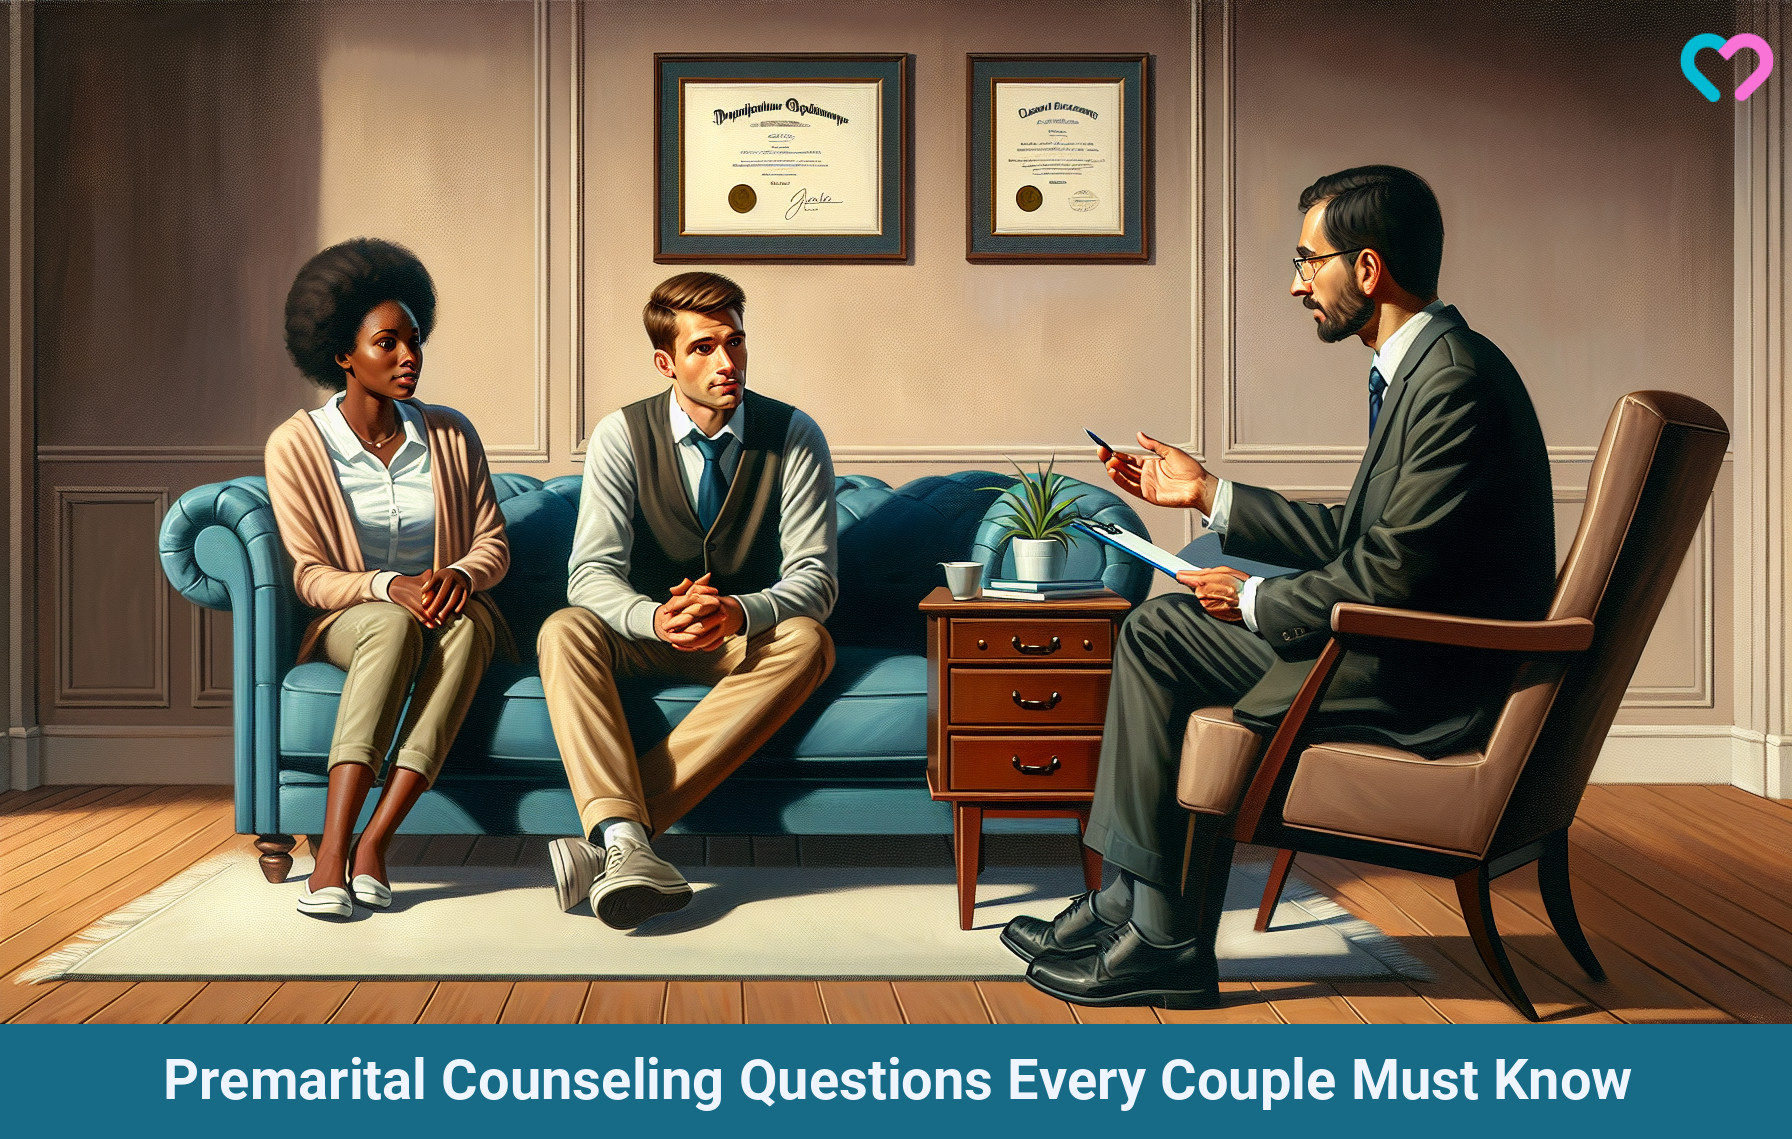 premarital counseling questions_illustration